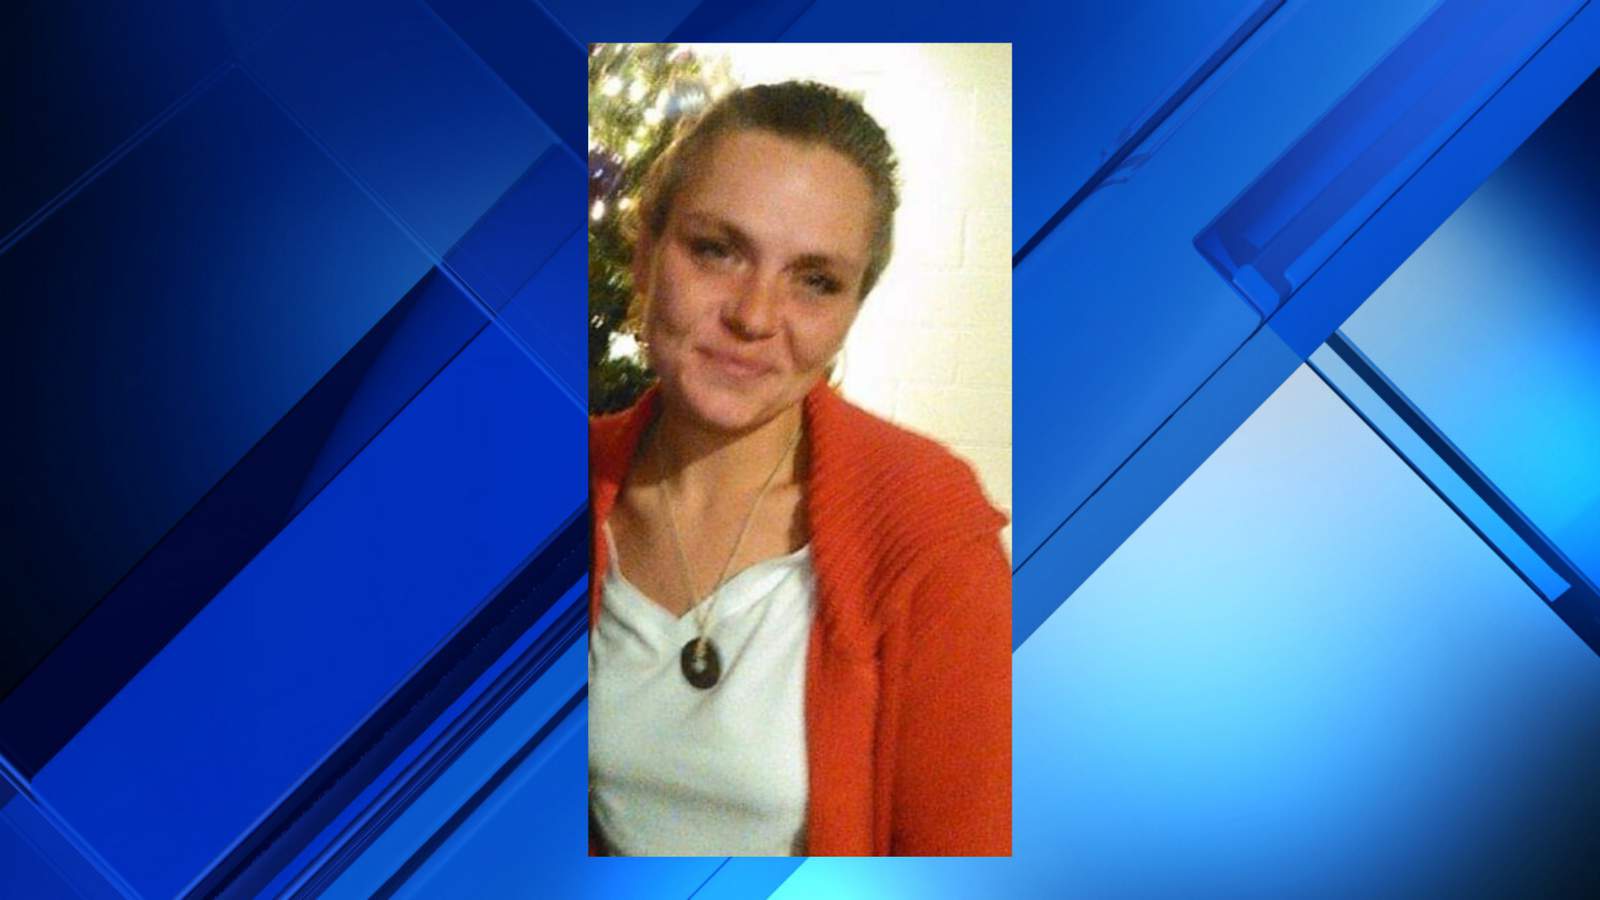 Detroit police looking for missing 42-year-old woman